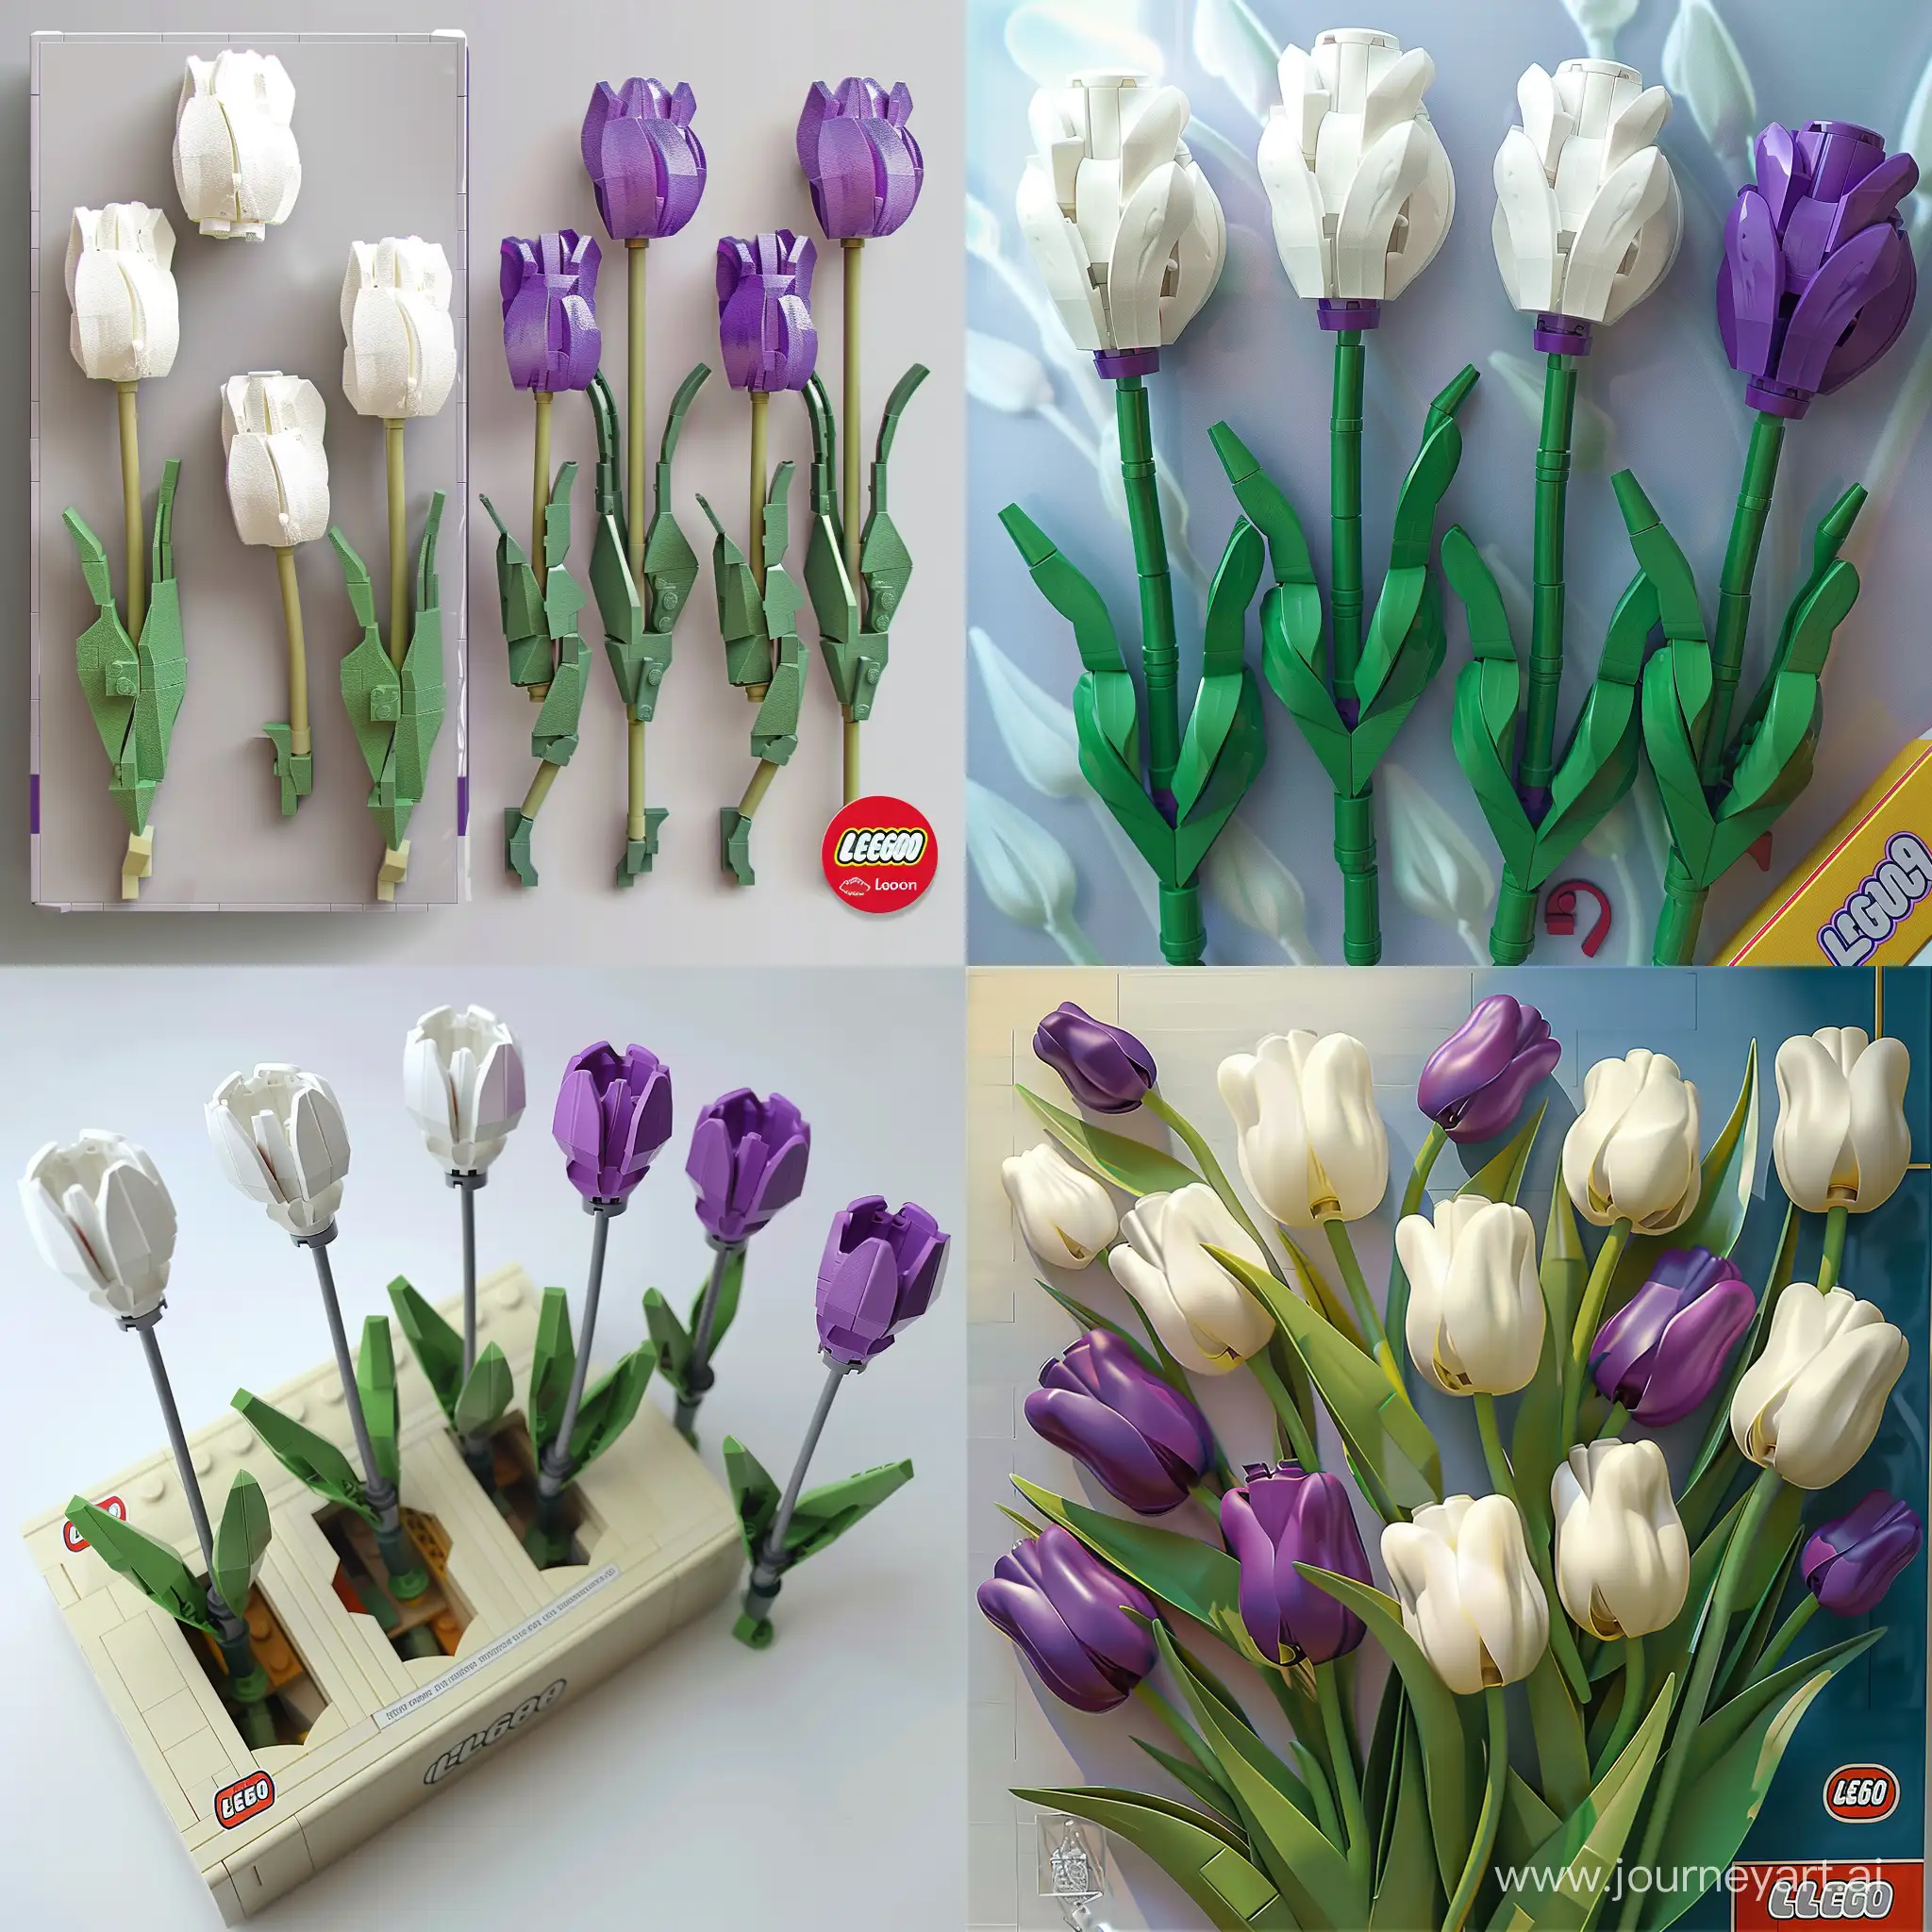 Create me a realistic concept of detailed lego tulips, white and gentle purple colors, with great ligthning and near to the lego box package